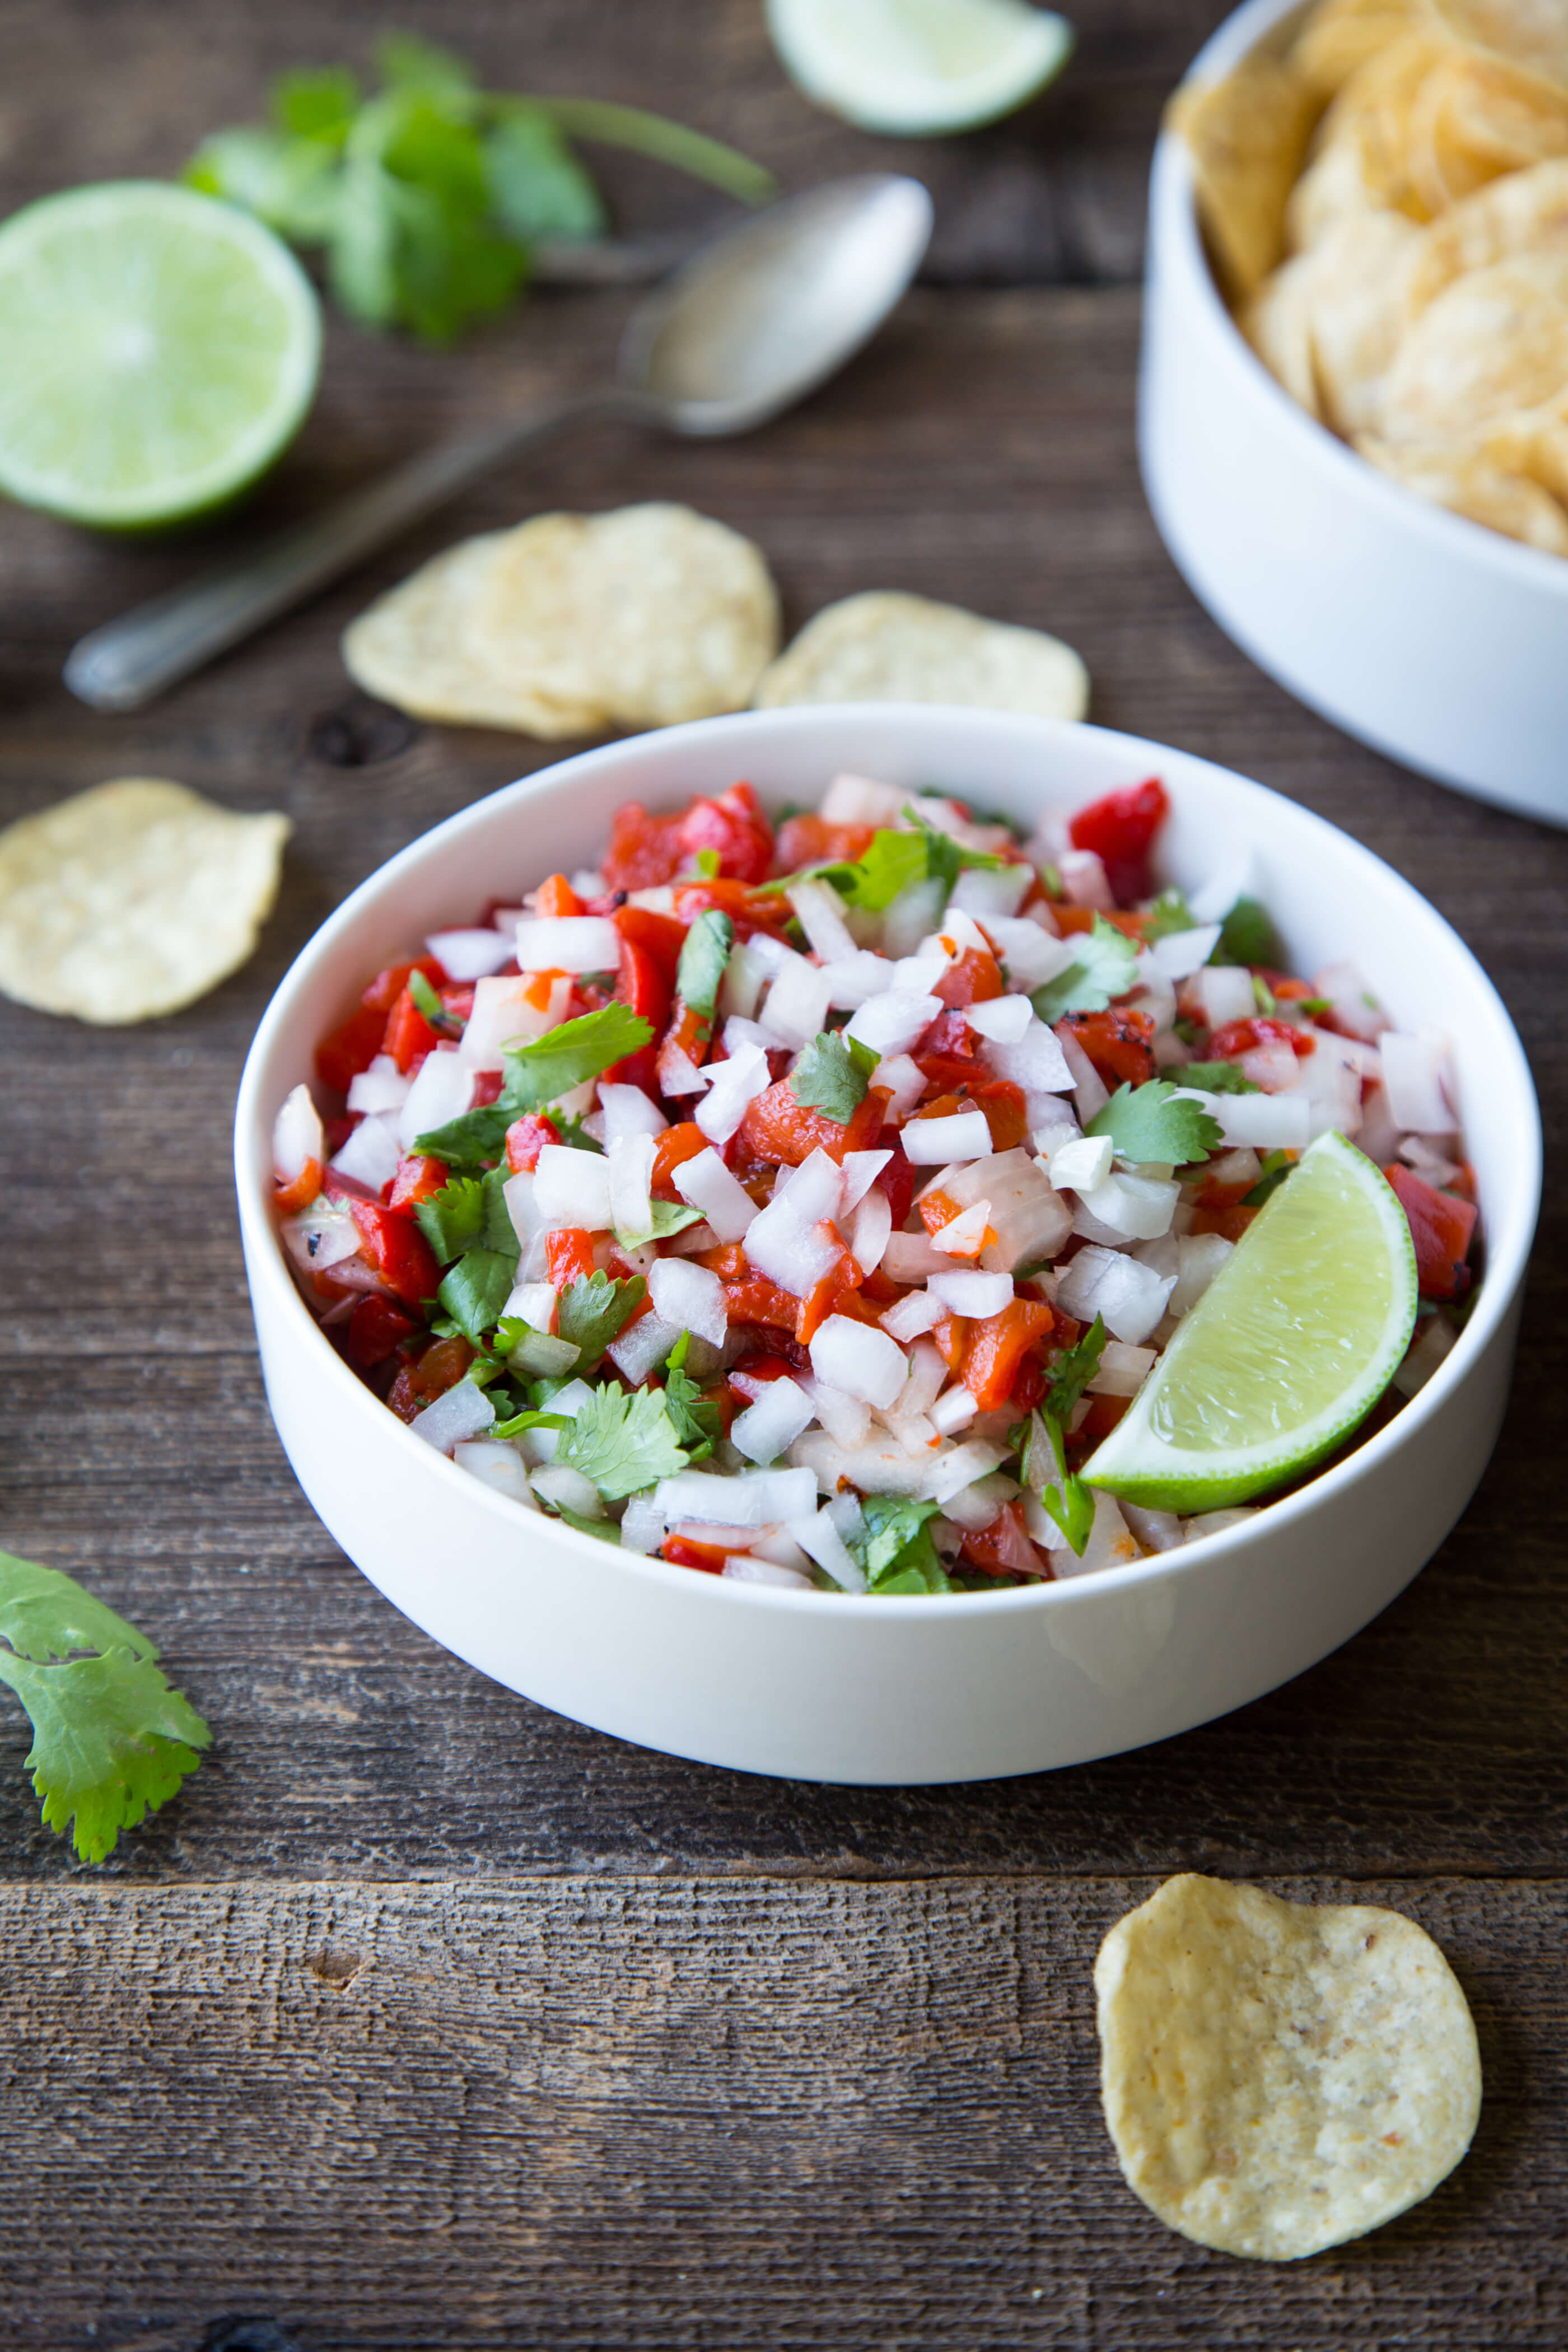 What's the best part of salsa? The Onions,, try this fabulous Sweet Onion and Roasted Red Pepper Salsa With Lime.